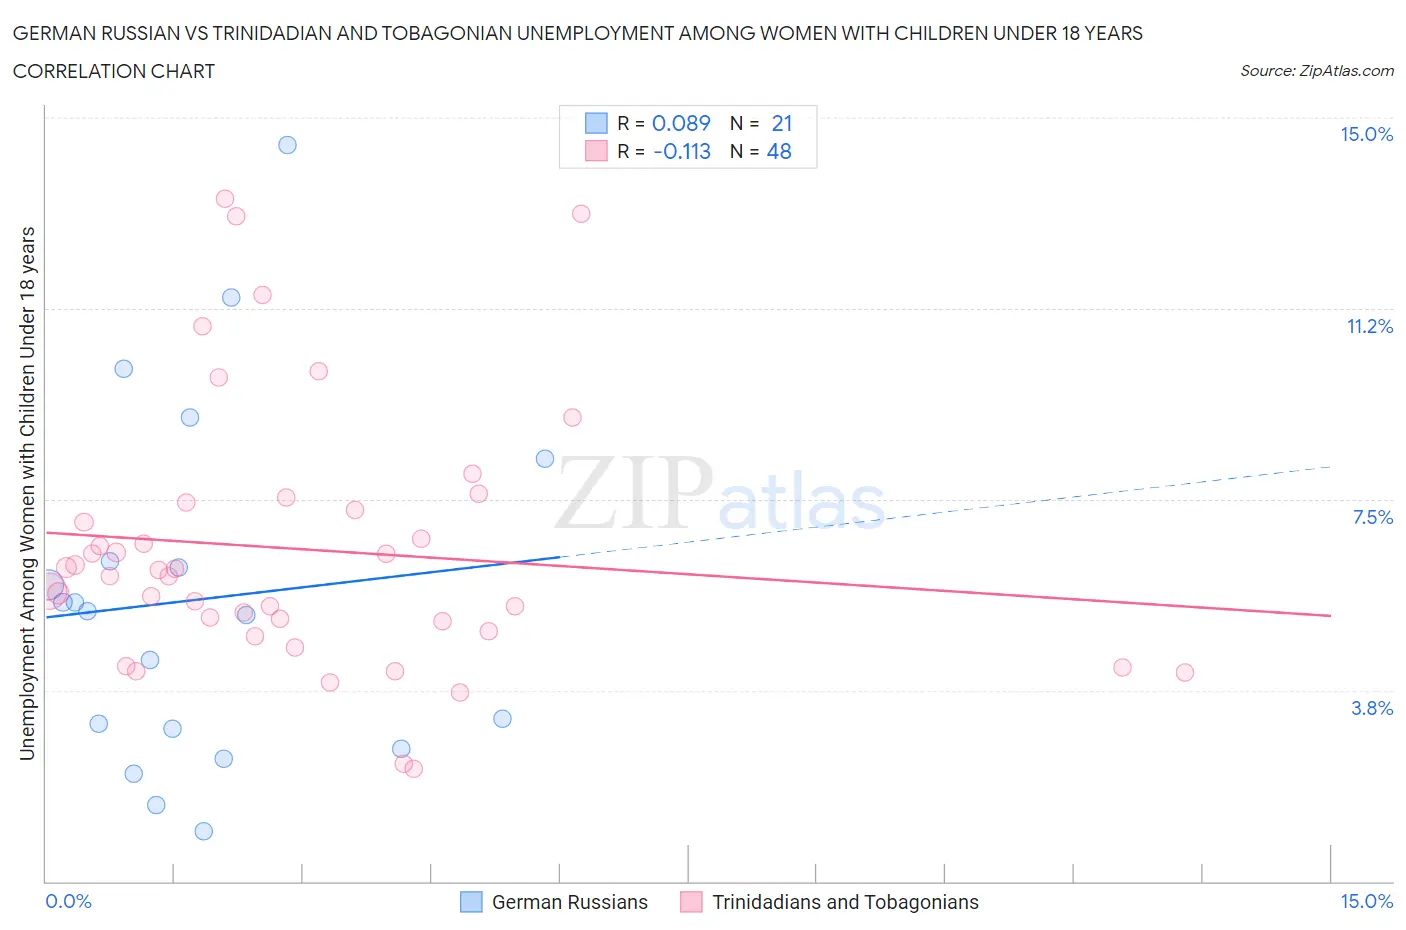 German Russian vs Trinidadian and Tobagonian Unemployment Among Women with Children Under 18 years